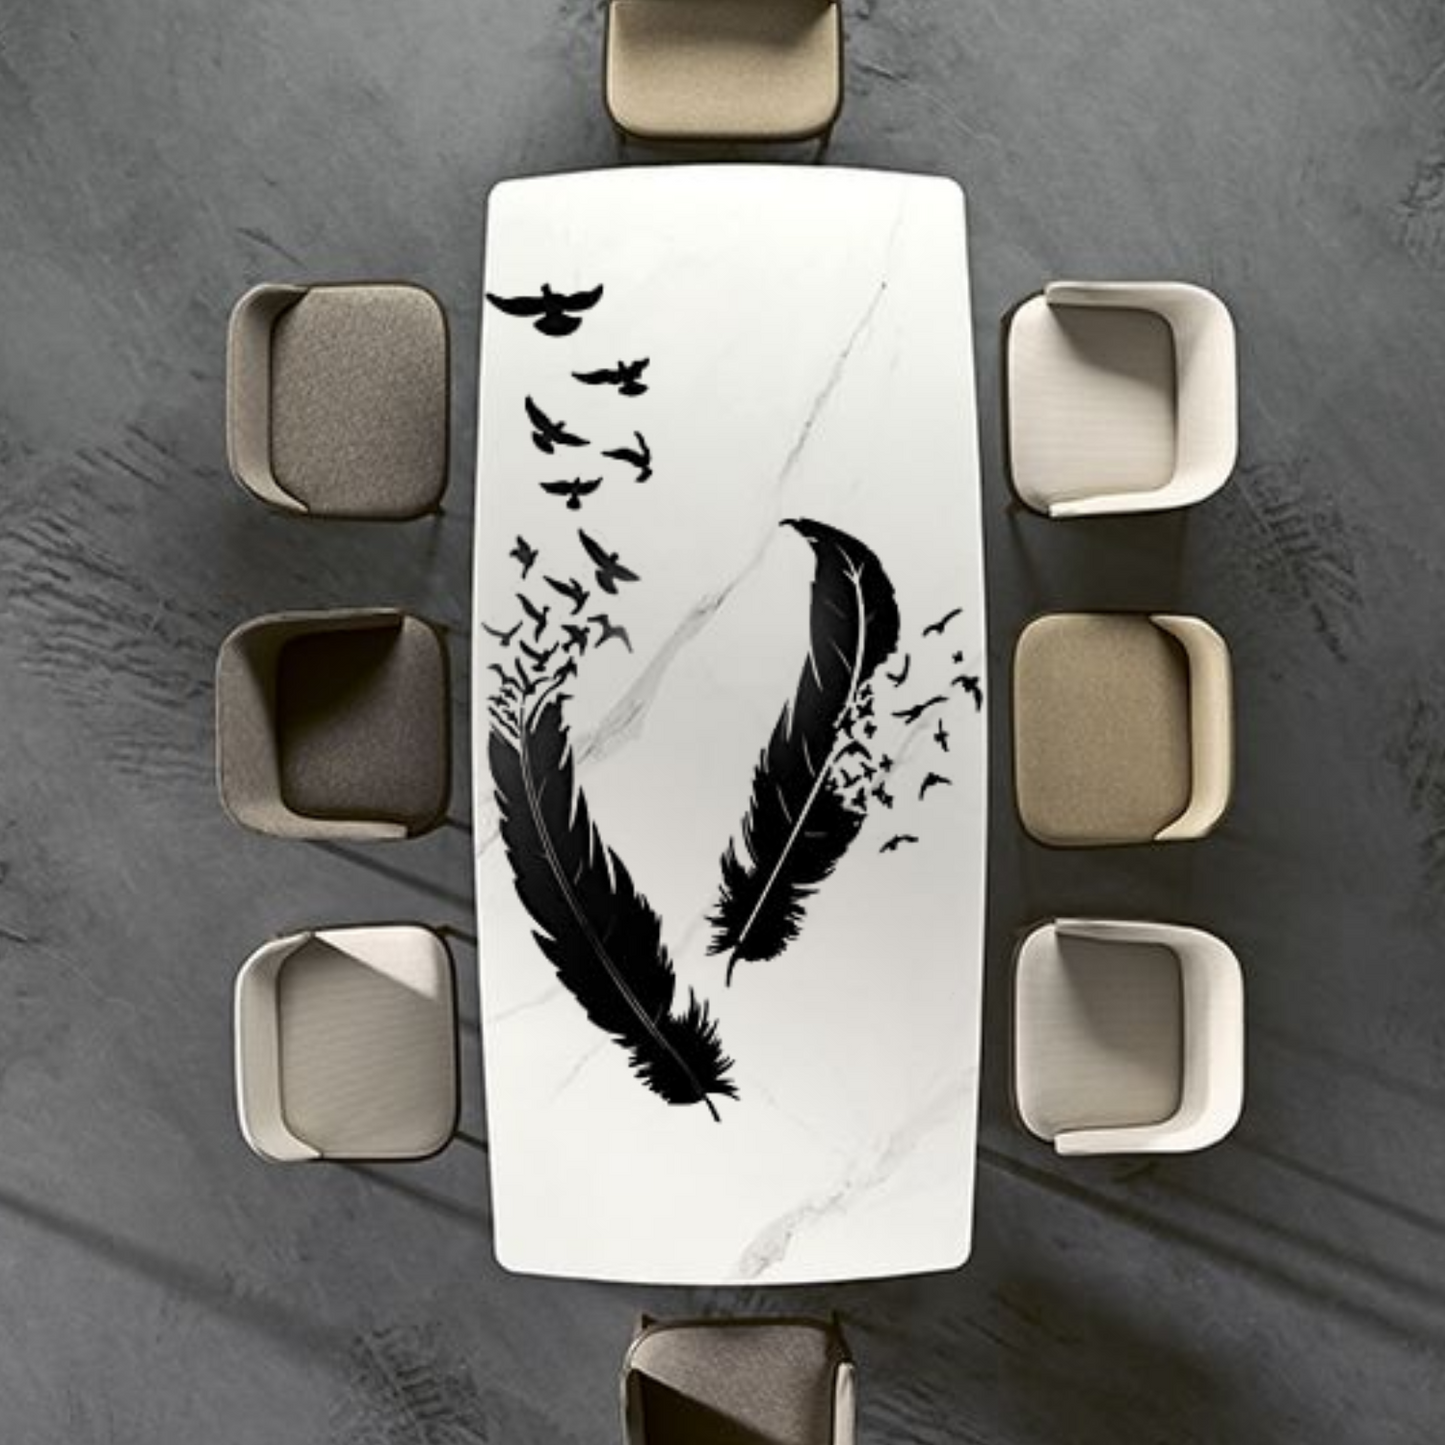 Flying Feathers Wall Design Stencil (KHSNT365)